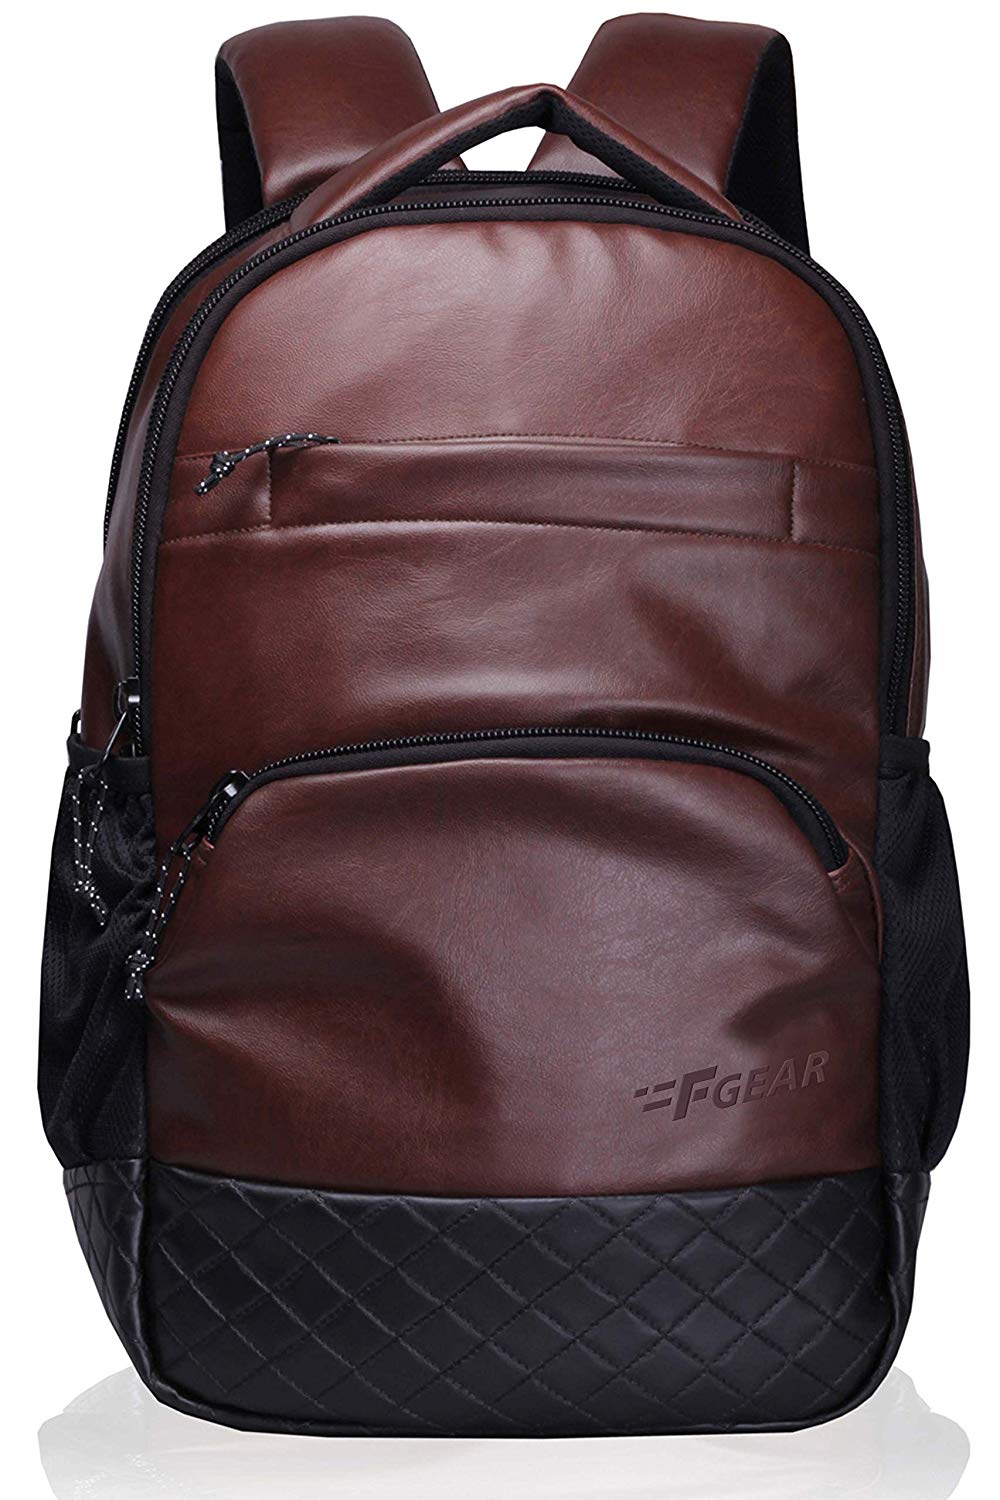 Laptop Bagpacks for College Students